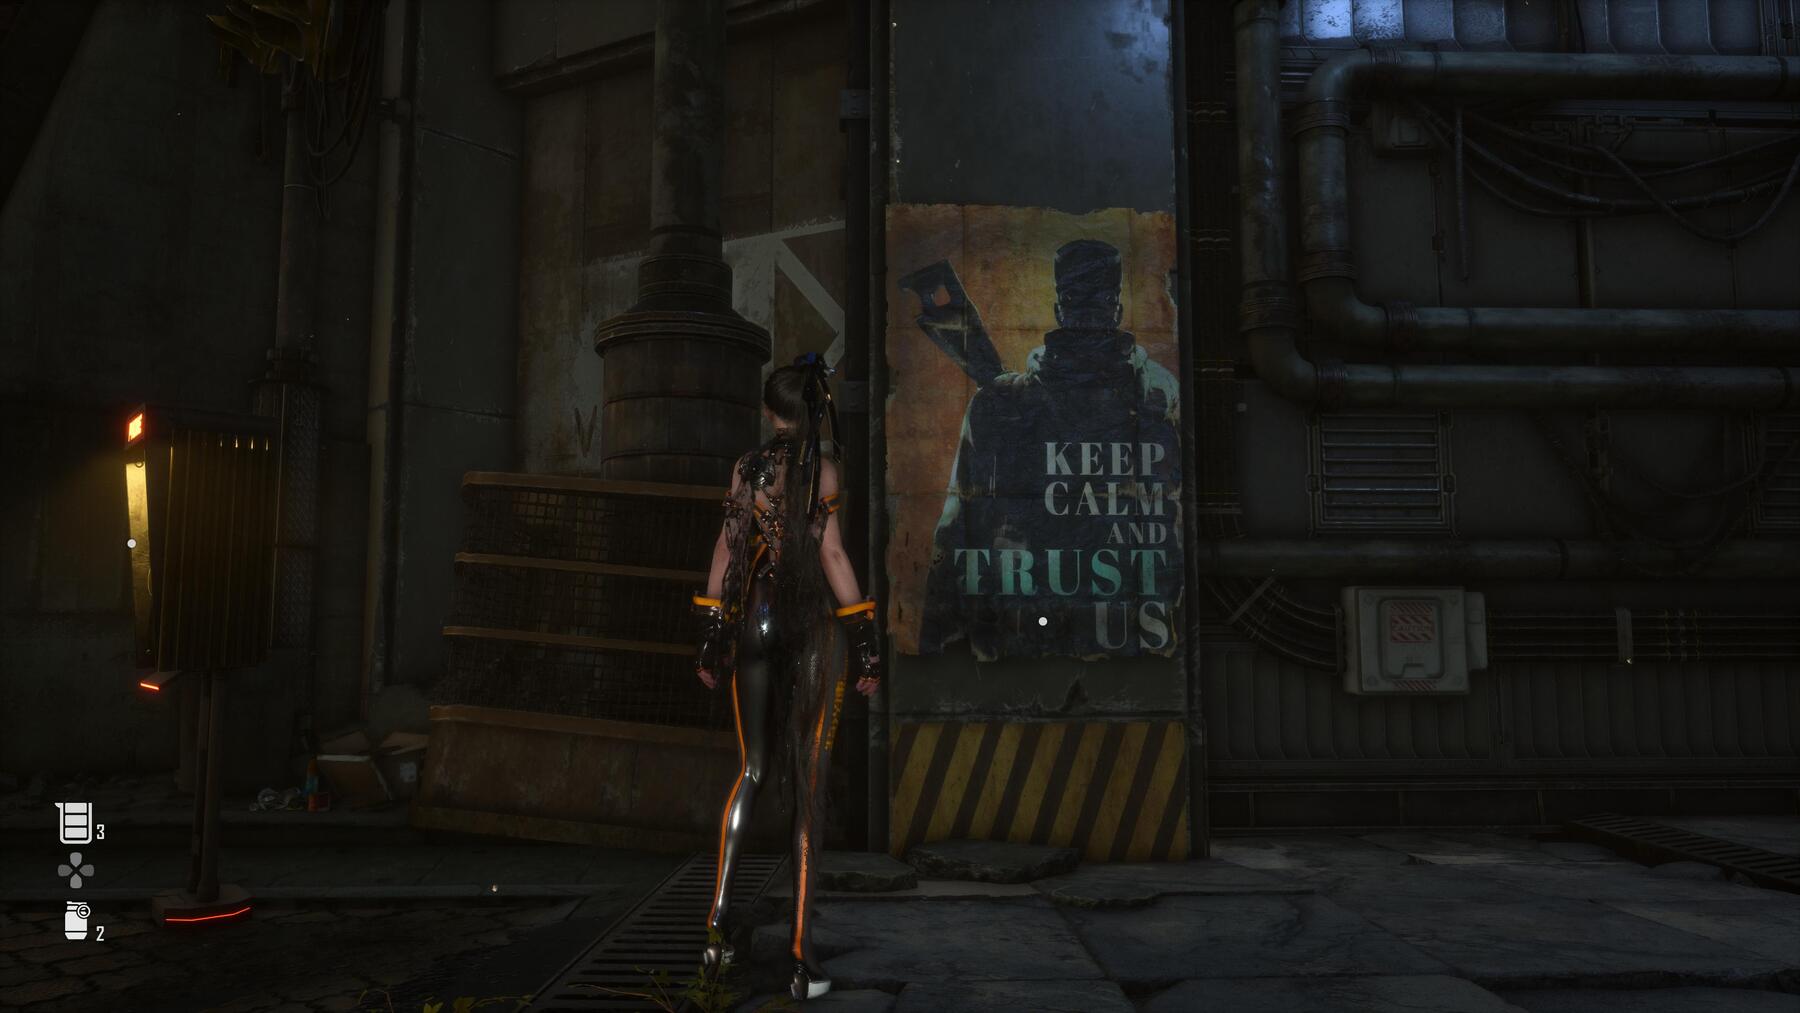 Eve in front of a Propaganda Poster